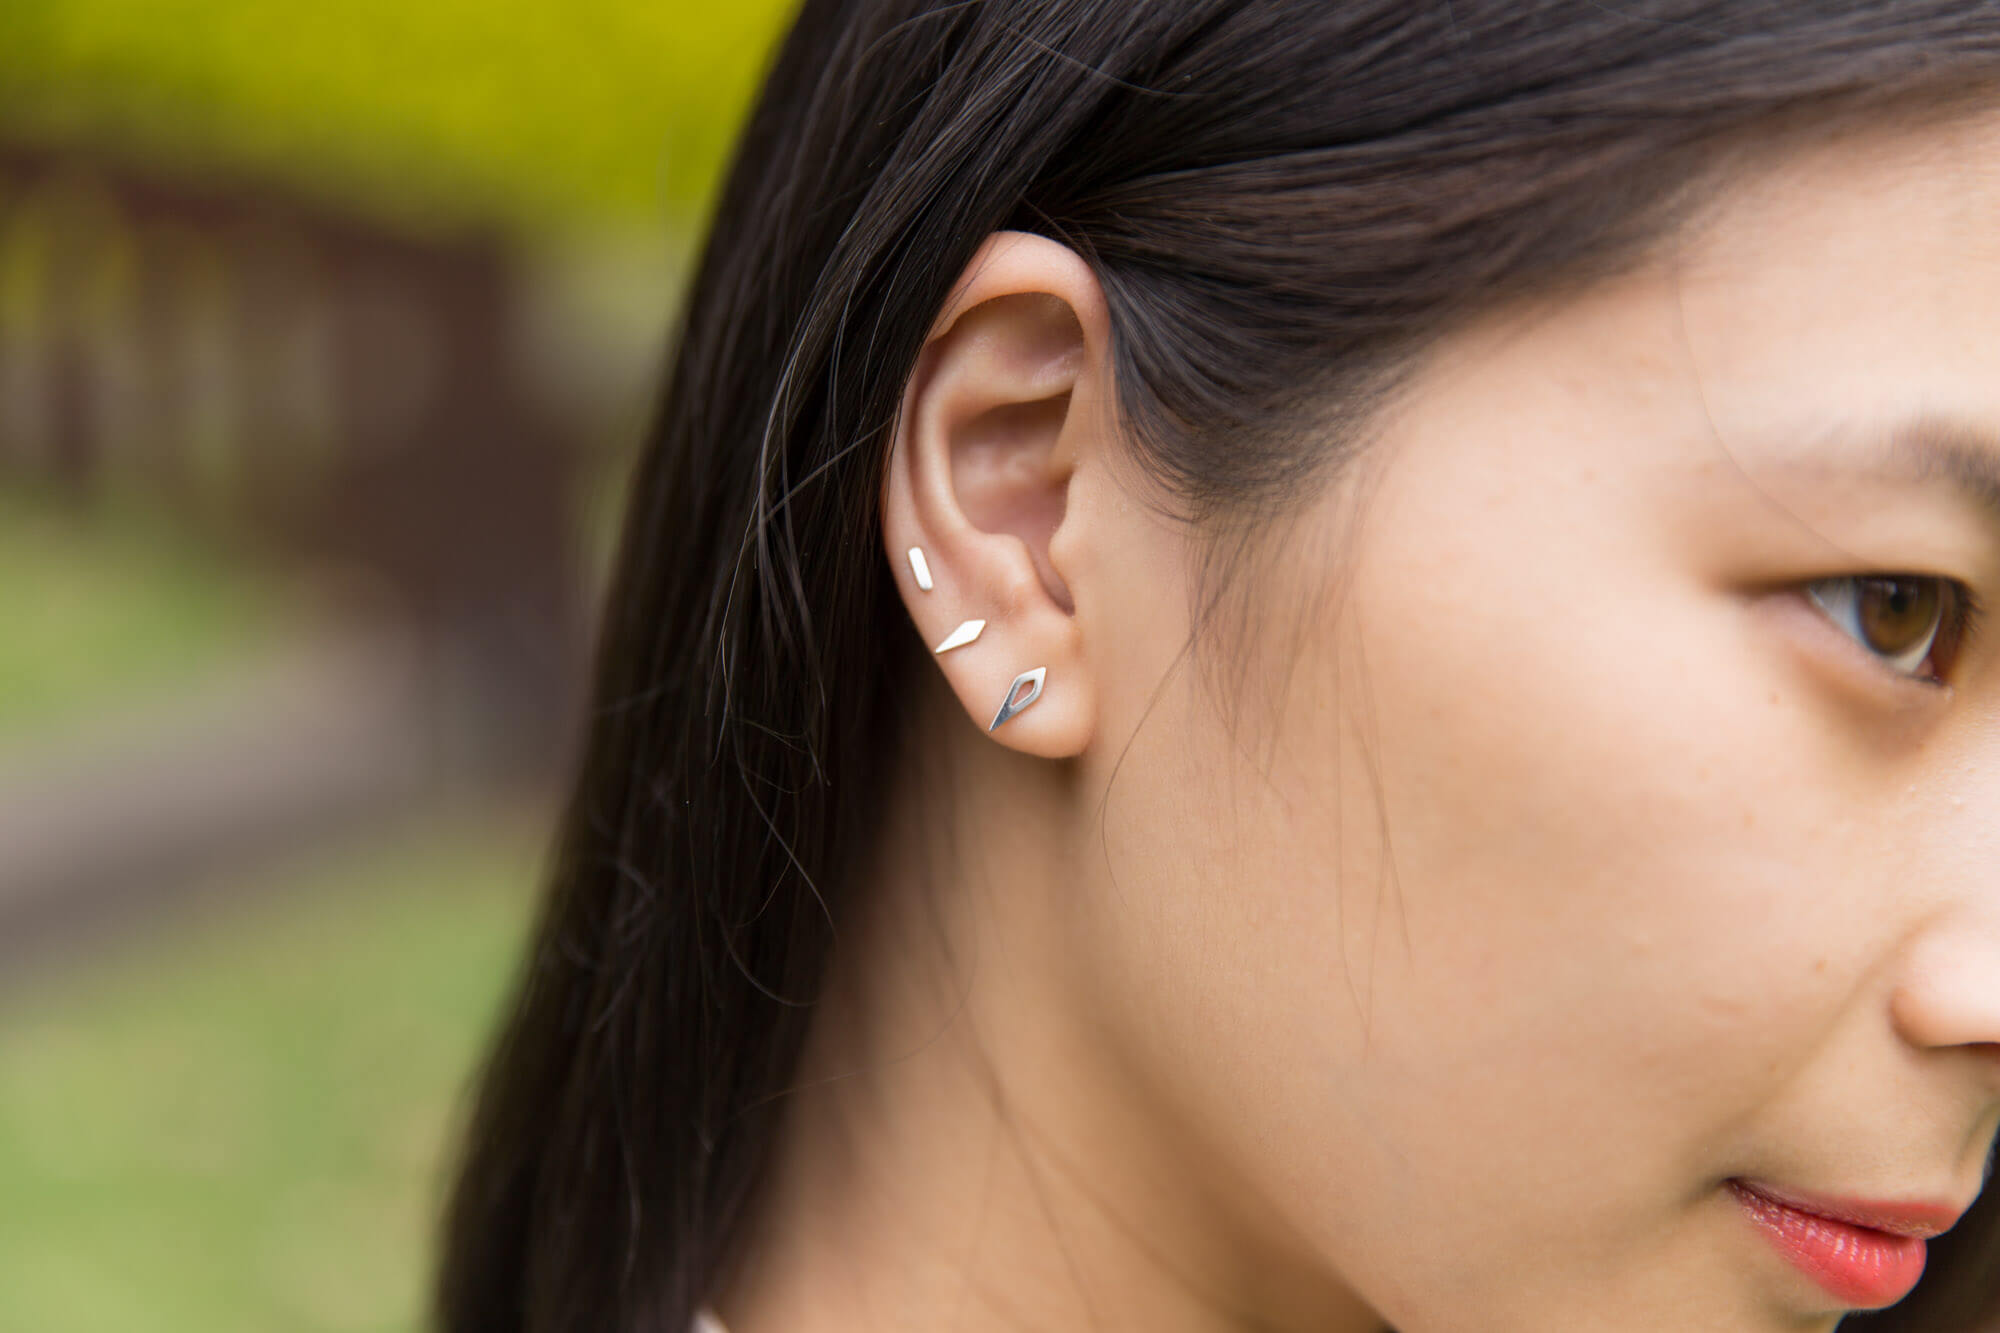 A closeup of the side of a womanâ€™s face with the focus on three small silver earrings on her earlobe